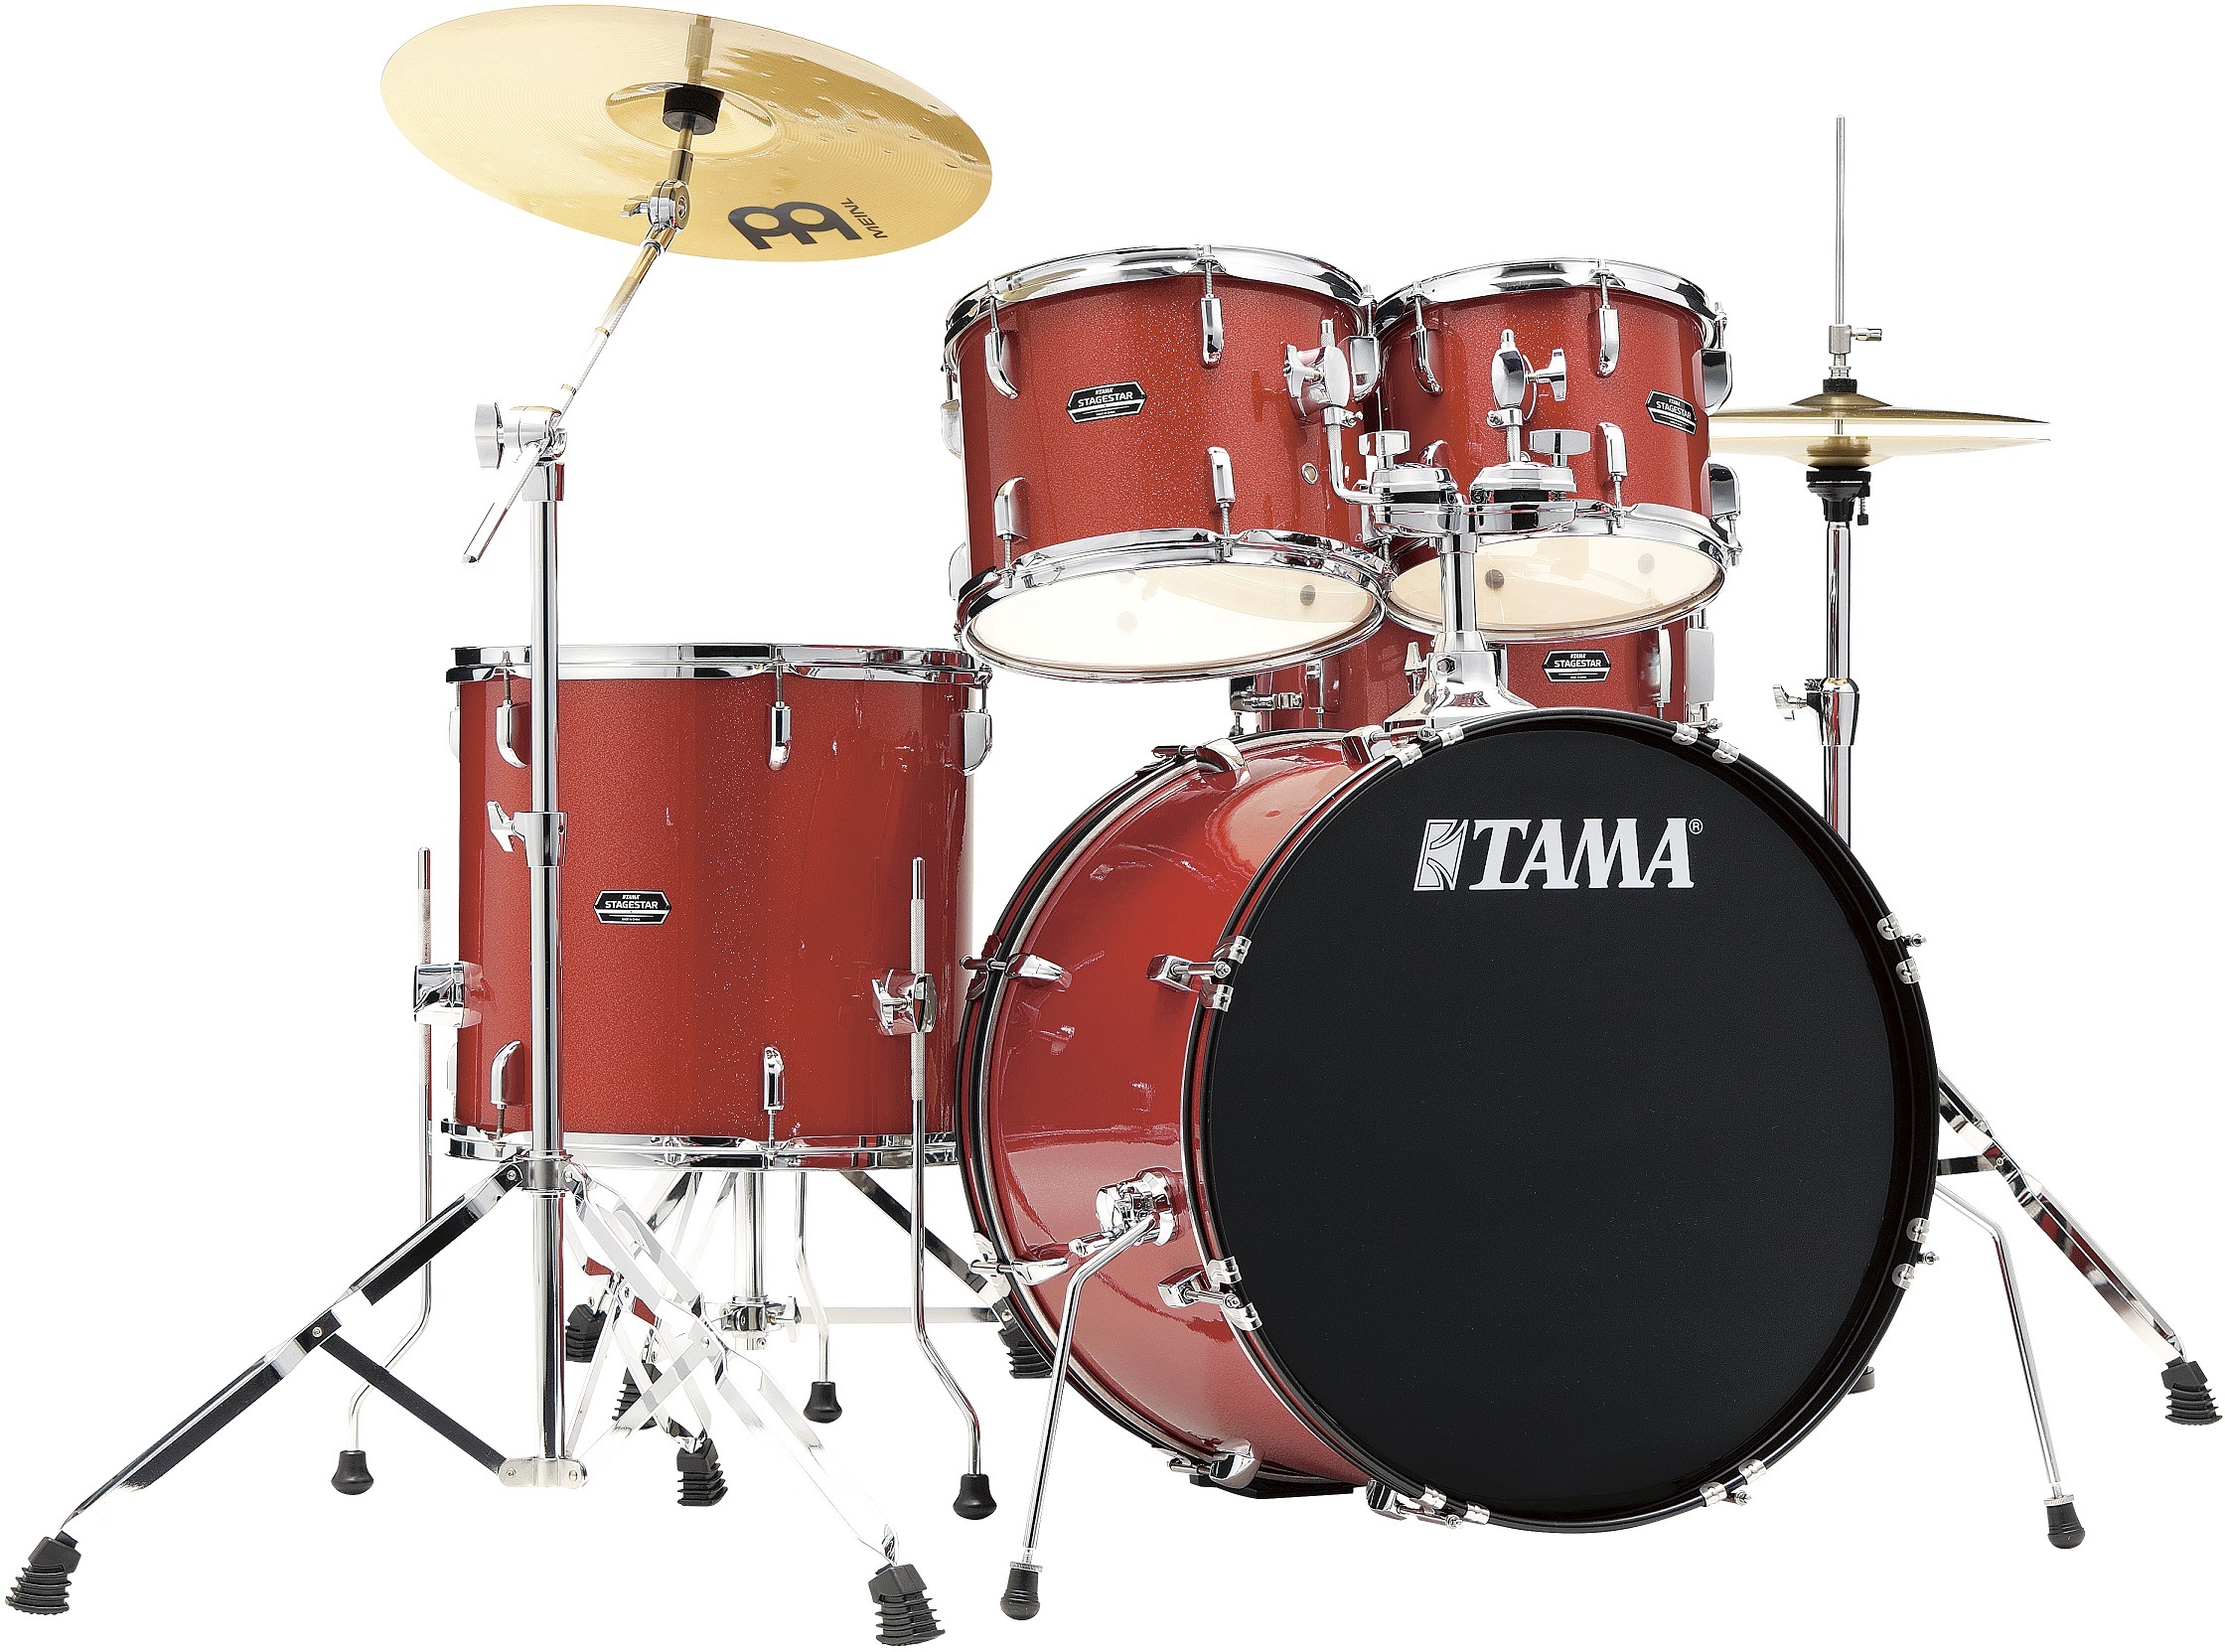 Tama Stagestar St52h5 22 Poplar Kit - Candy Red Sparkle - Batterie Acoustique Stage - Main picture